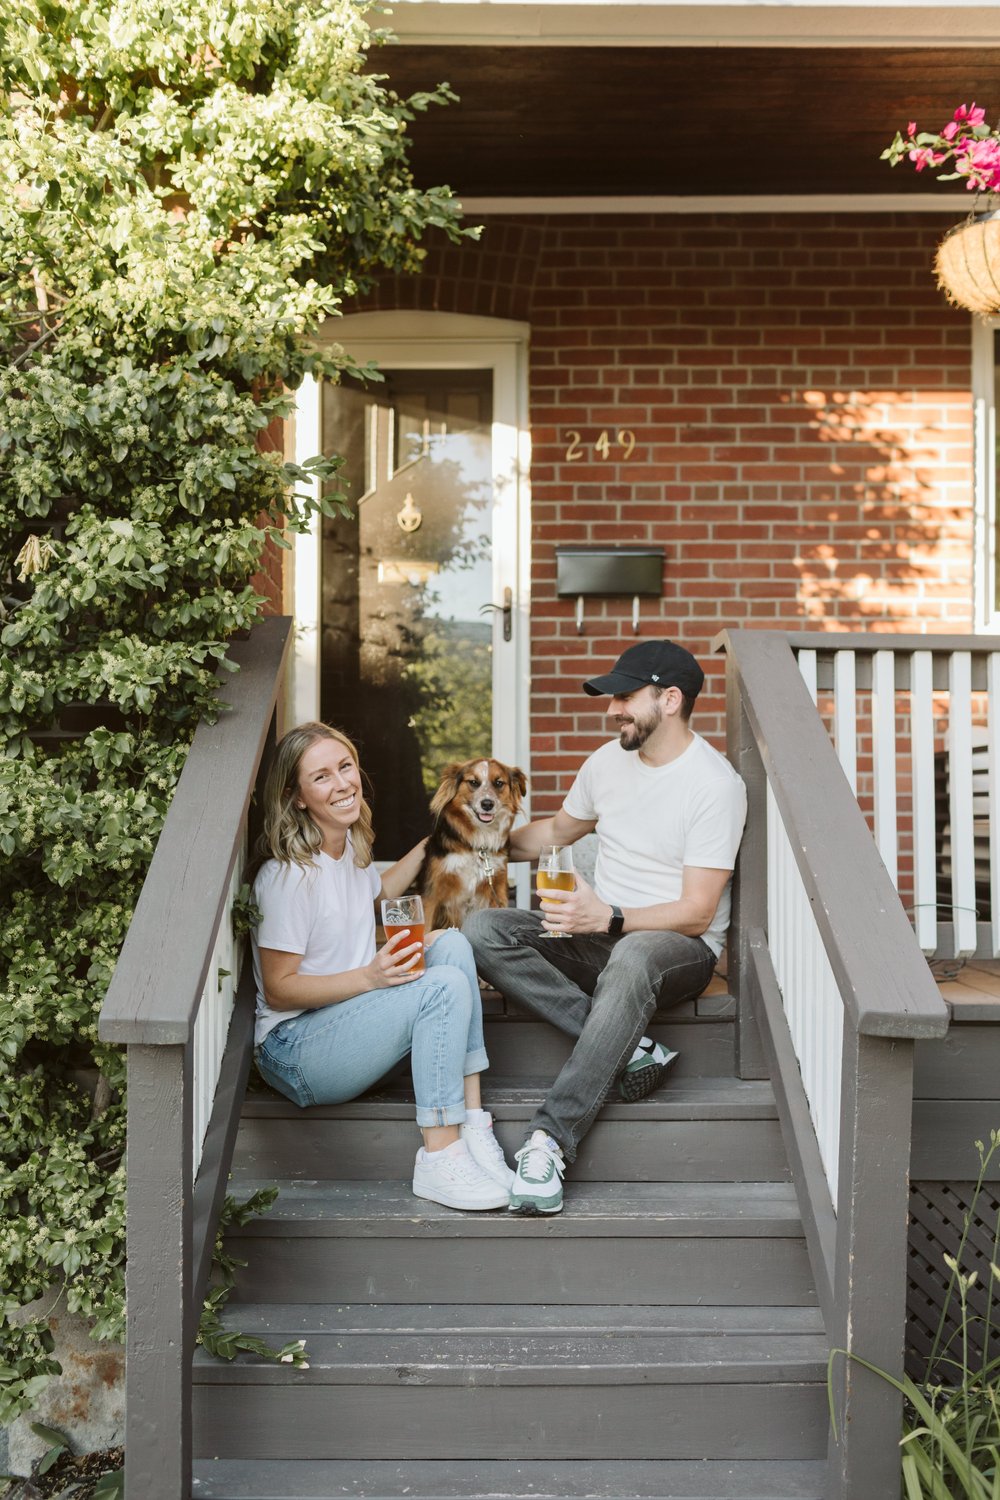 Pizza night for this couple who had their engagement session at home with their dog